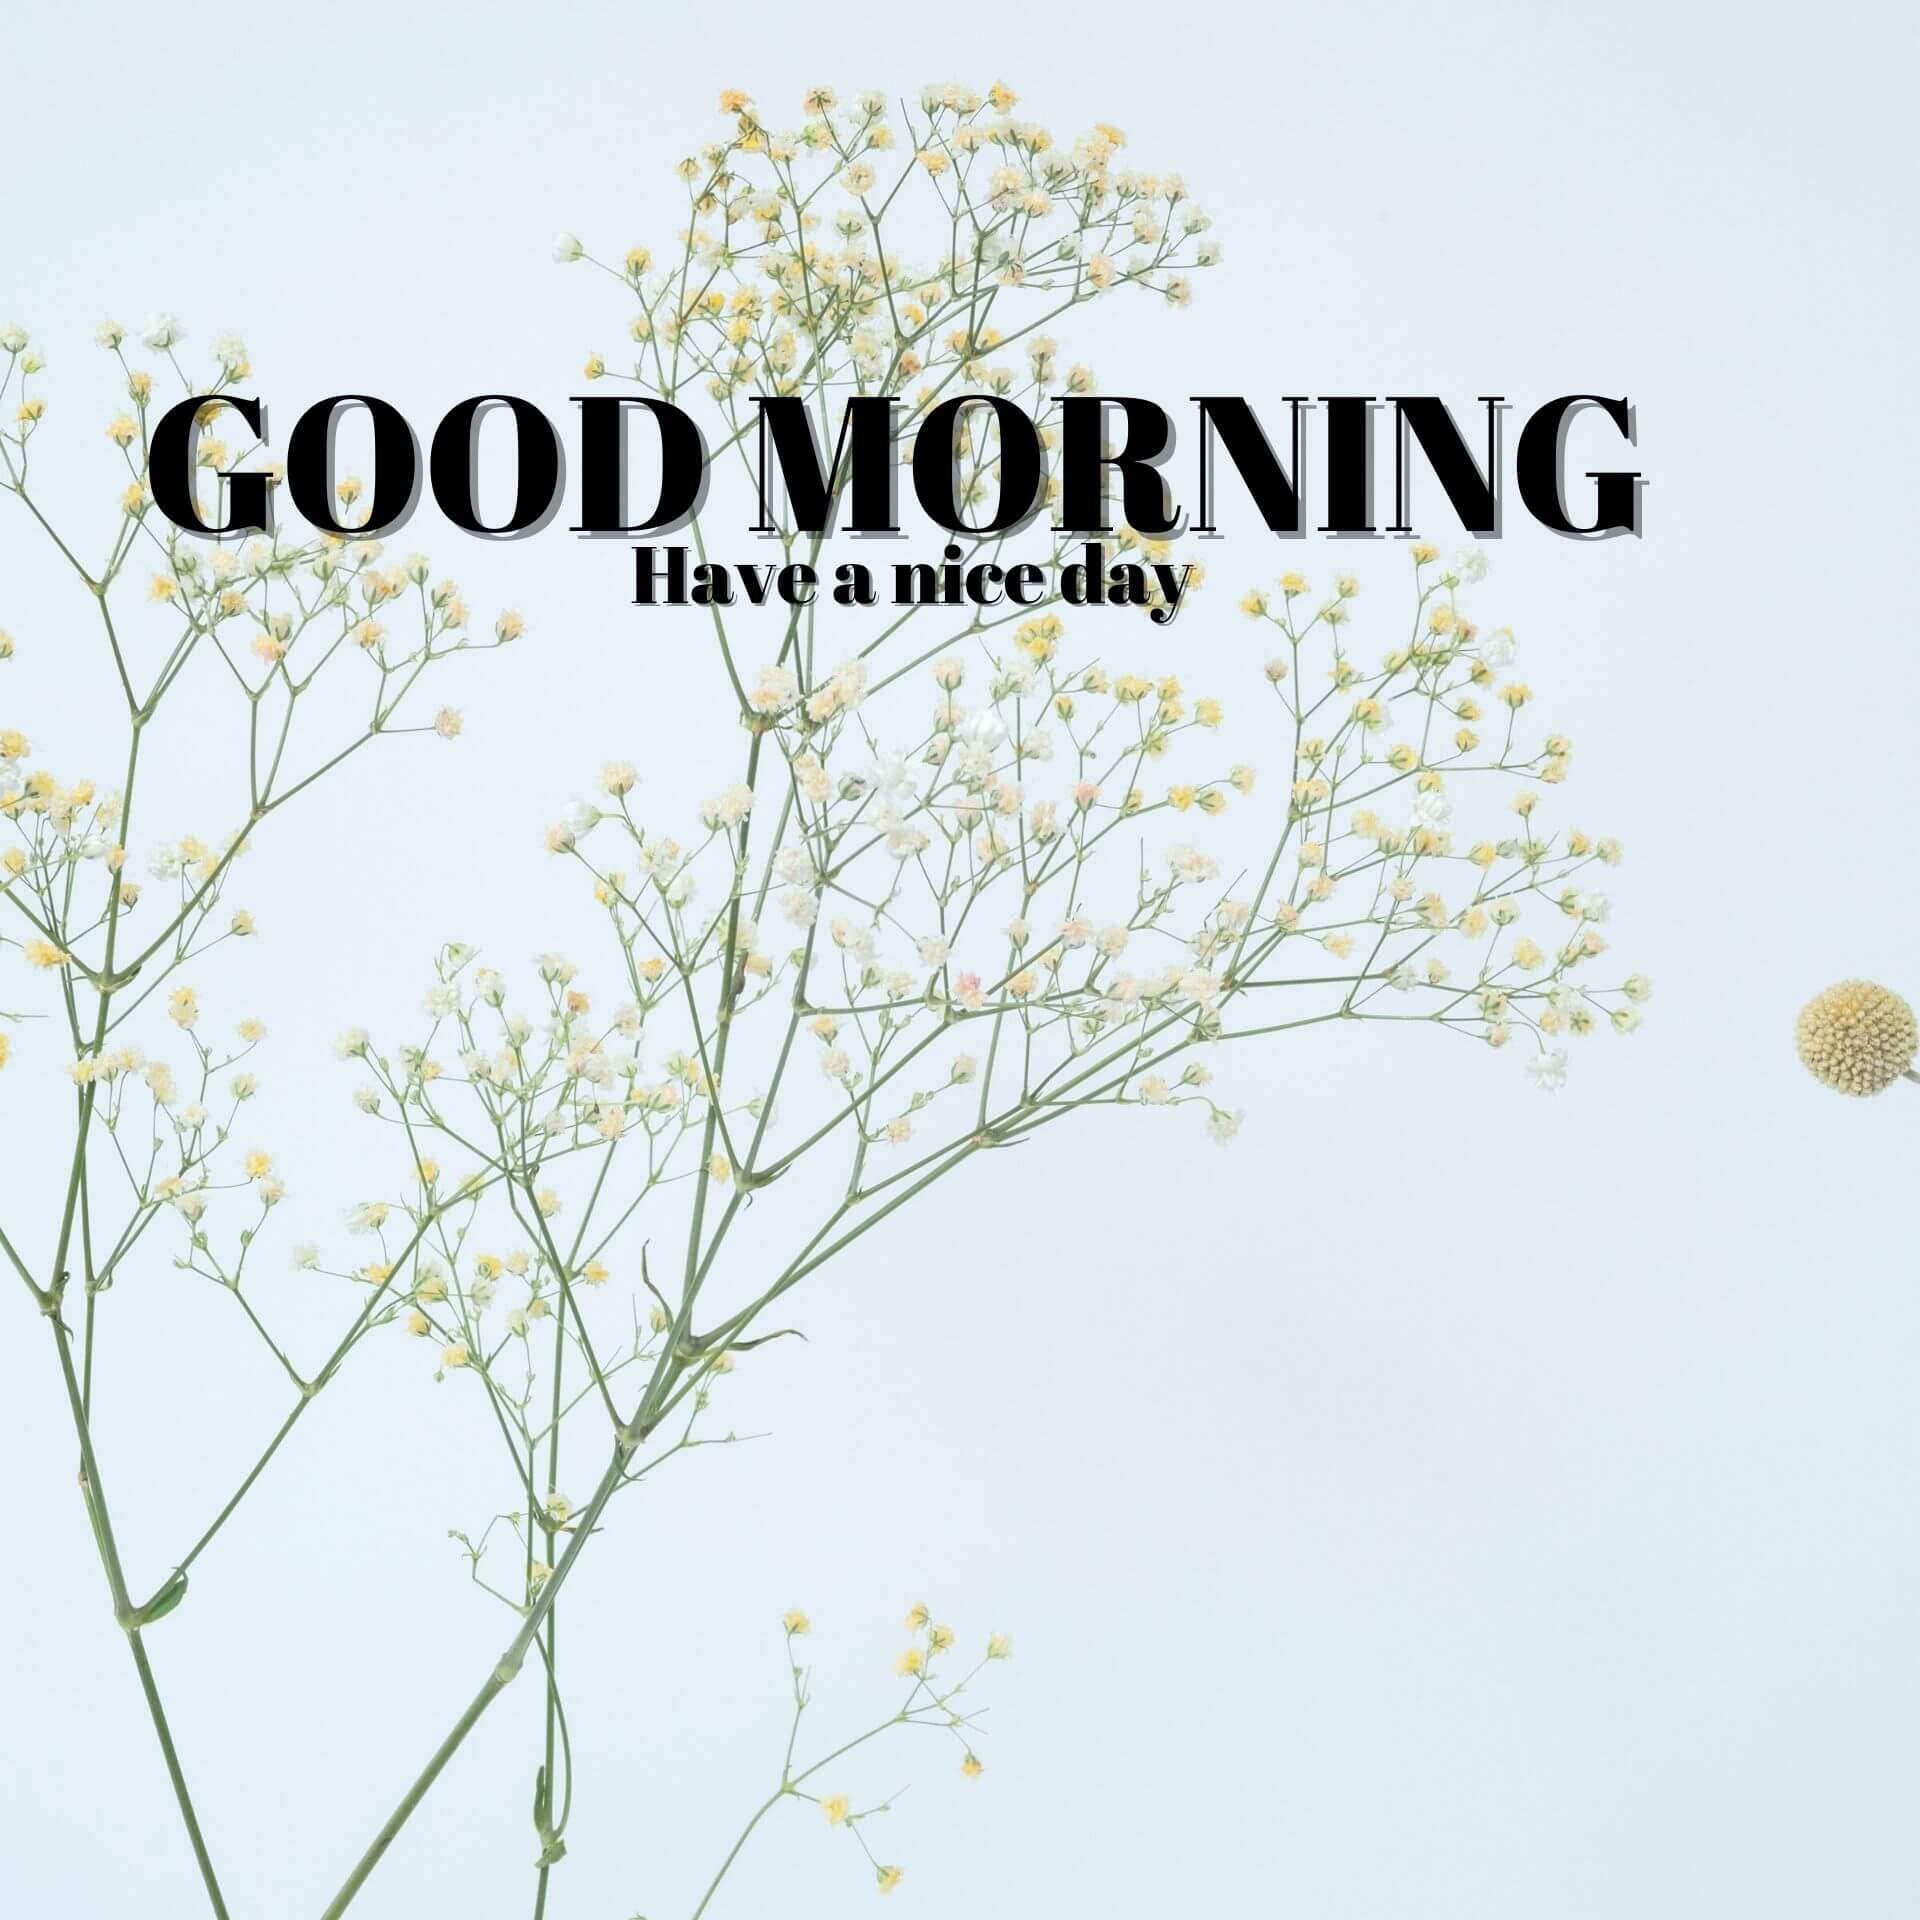 Good morning have a nice day Wallpaper 2023 Download